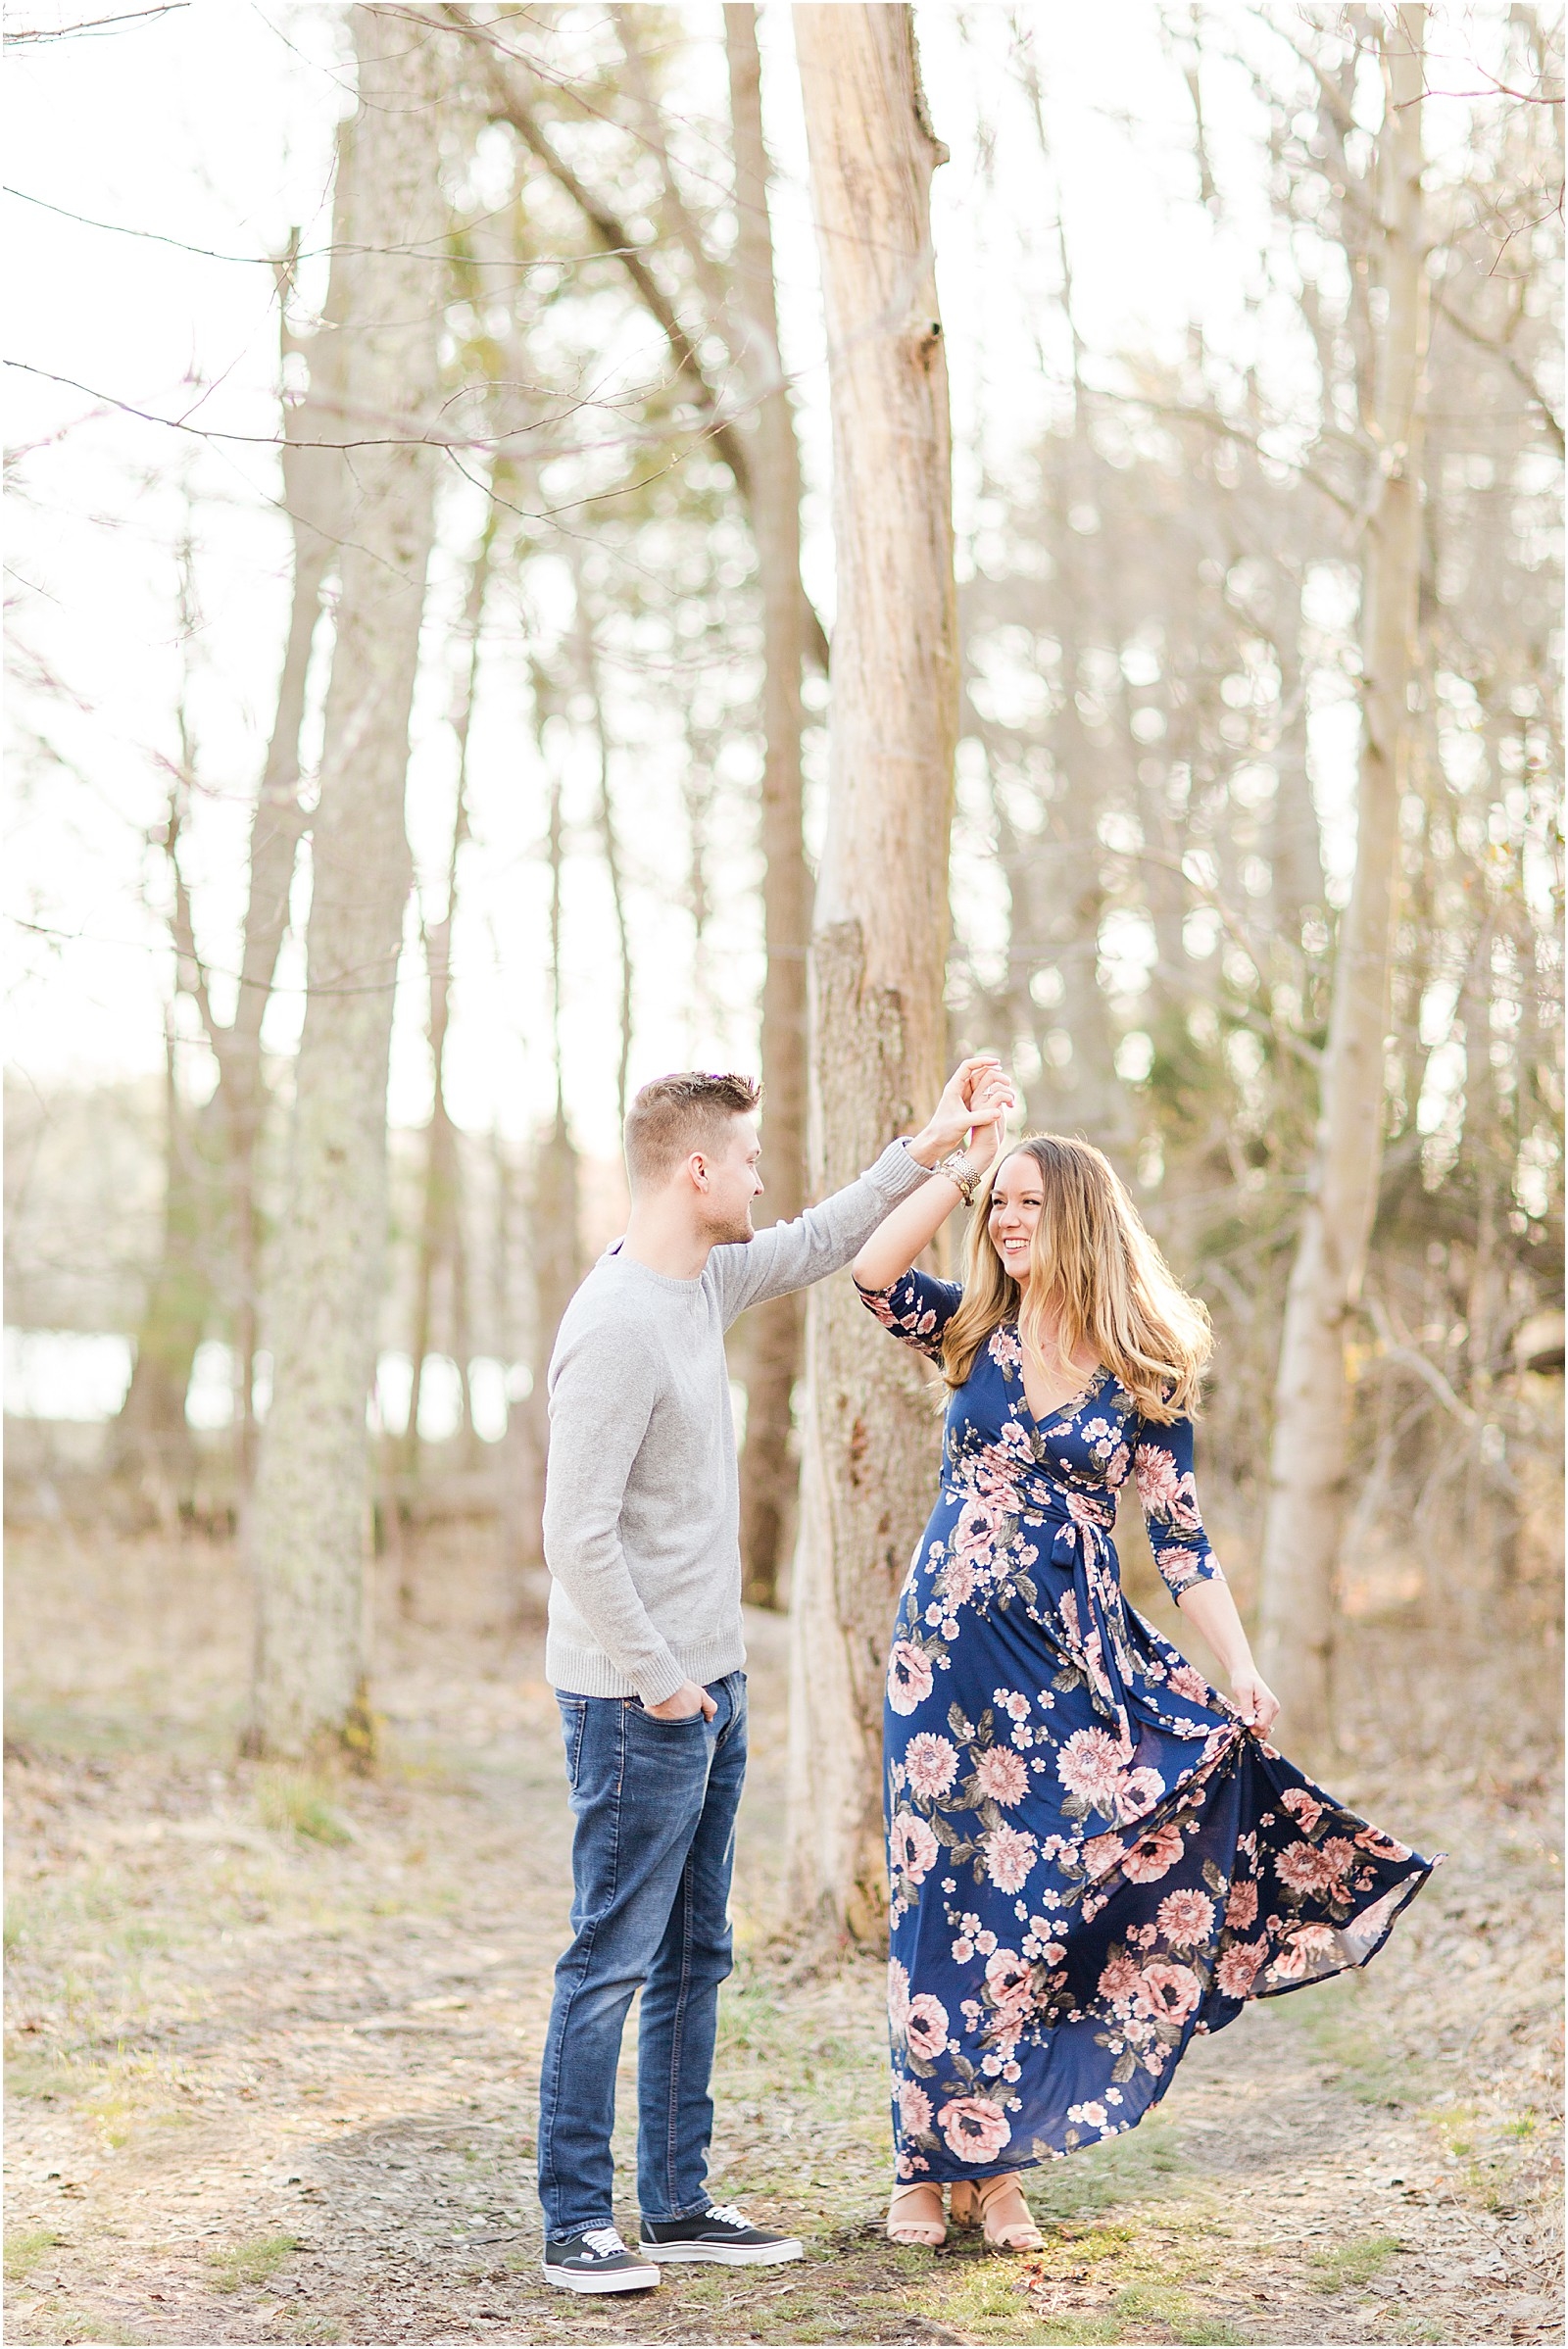 Rachel and Nick | Lincoln State Park Engagement Session 013.jpg